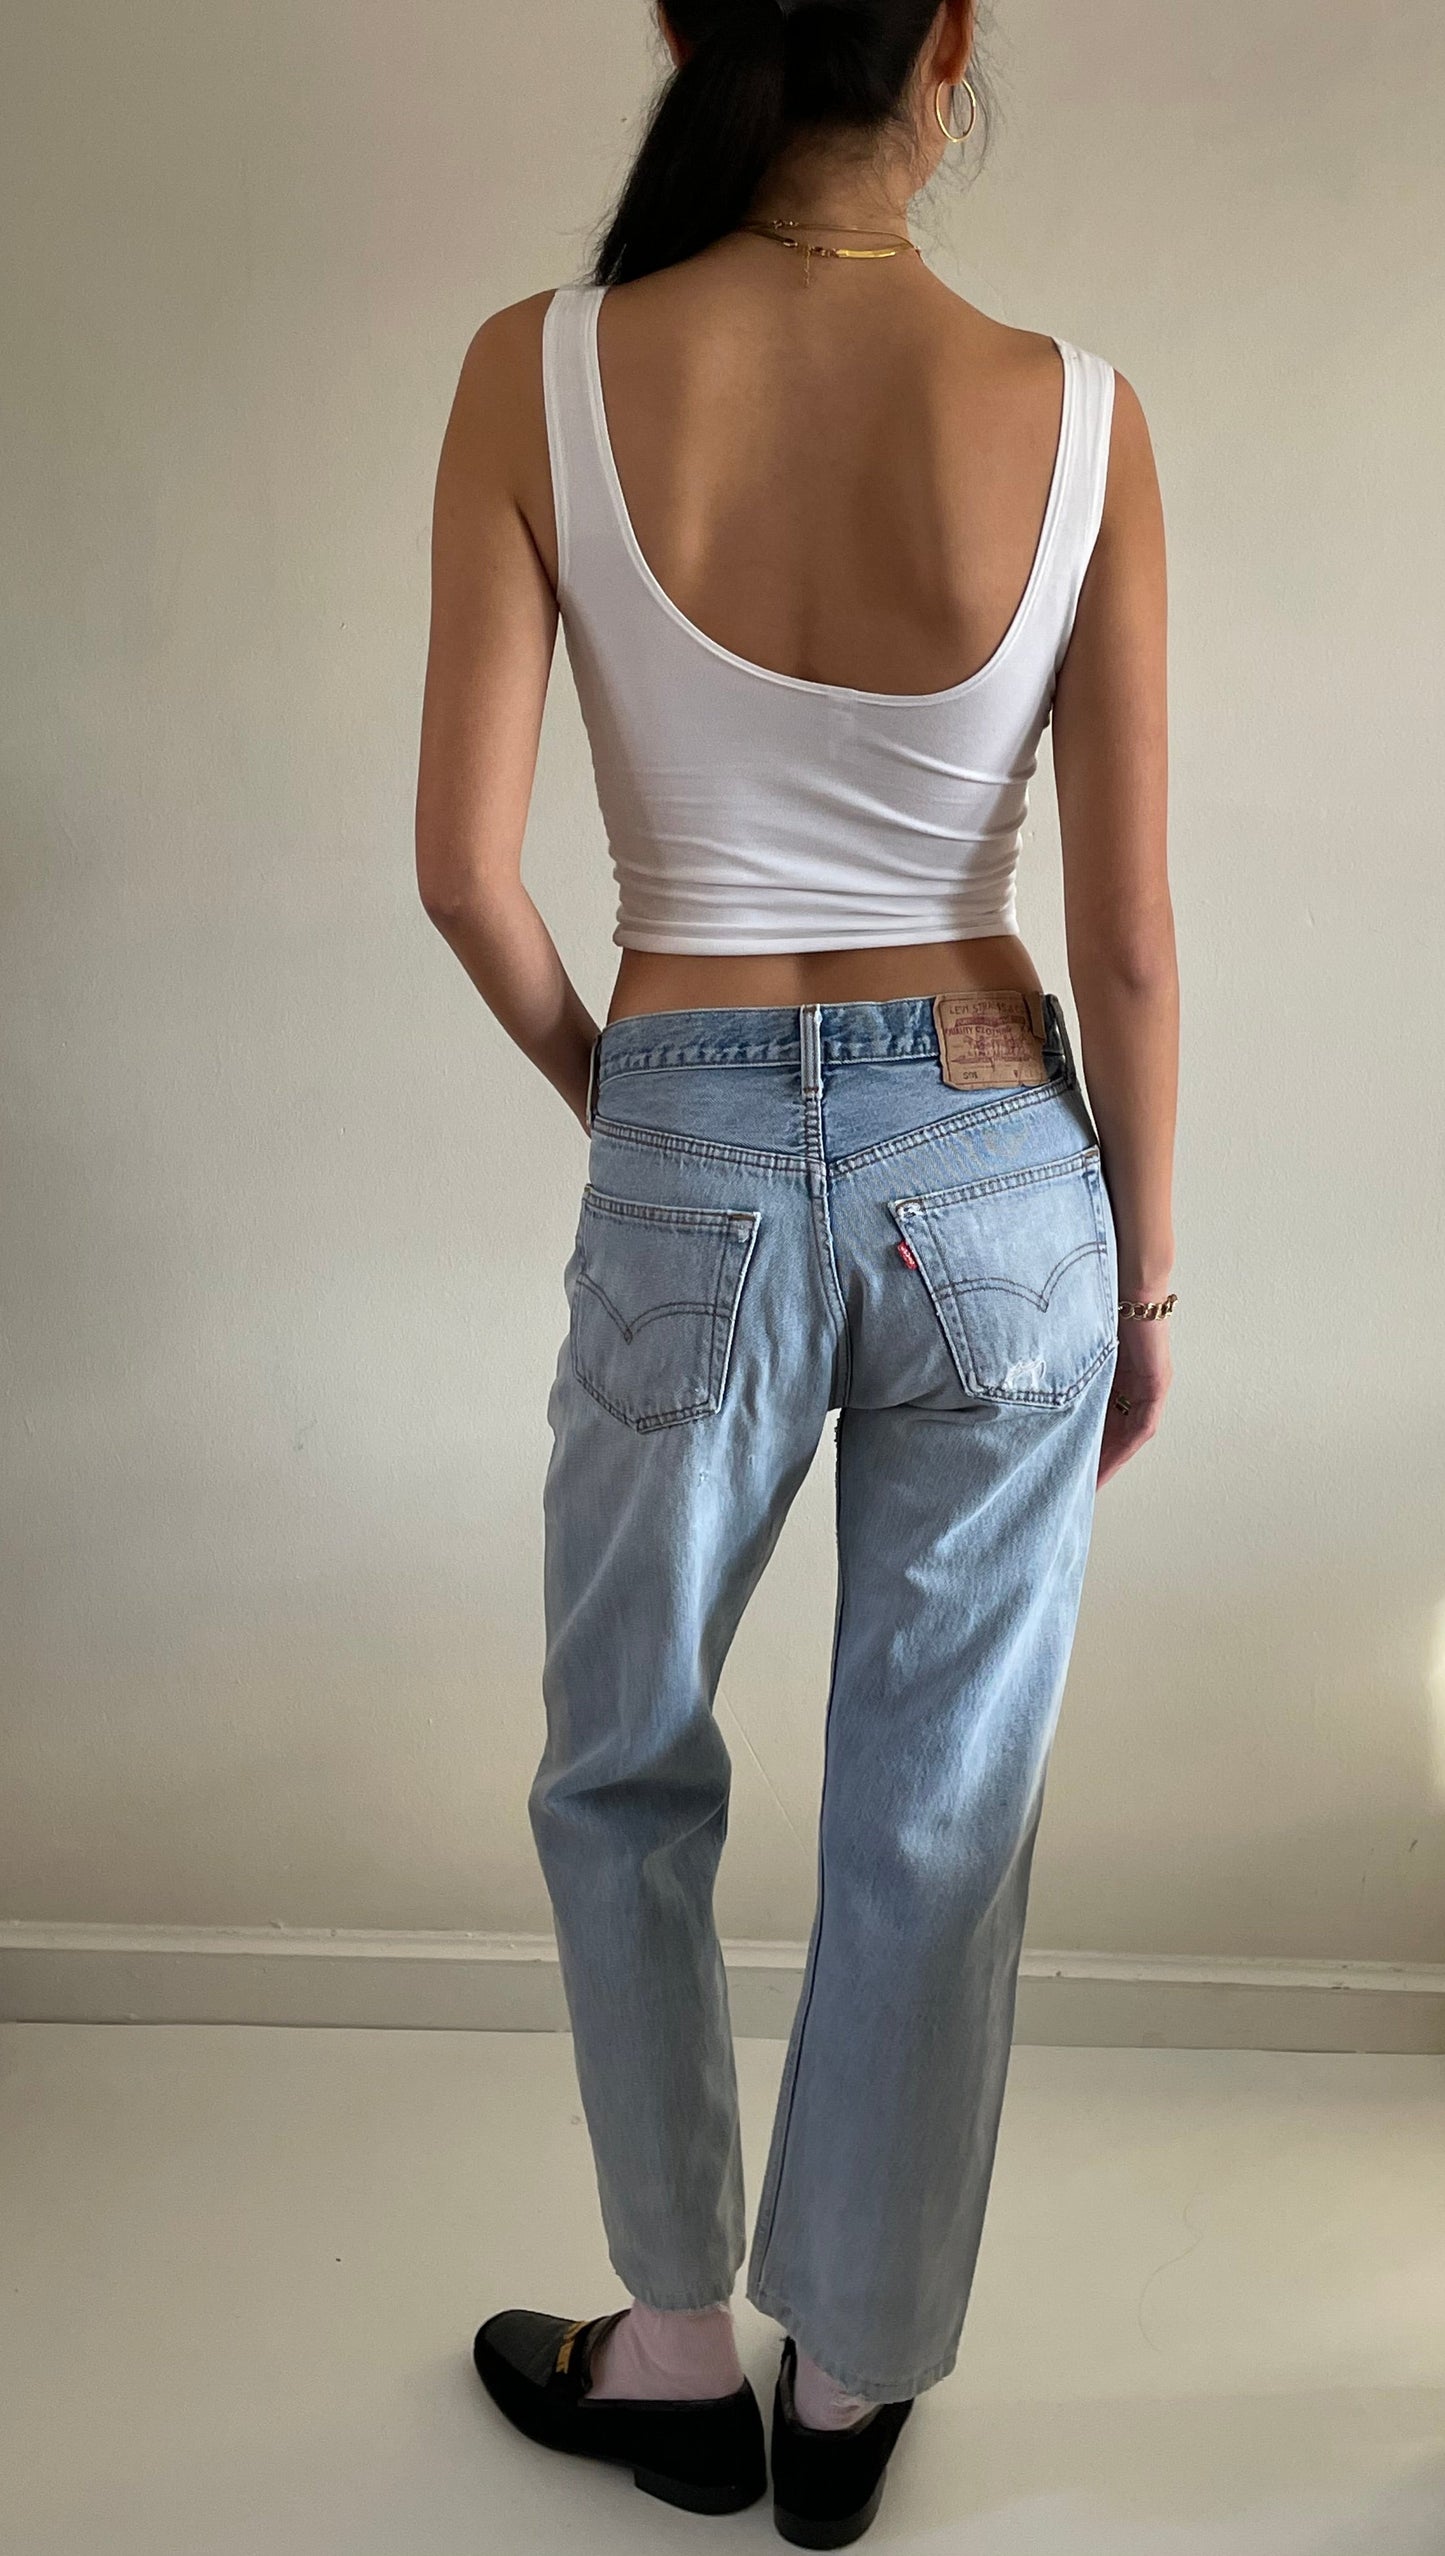 30 vintage Levis 501 button fly boyfriend slouchy faded light wash jeans / size 30